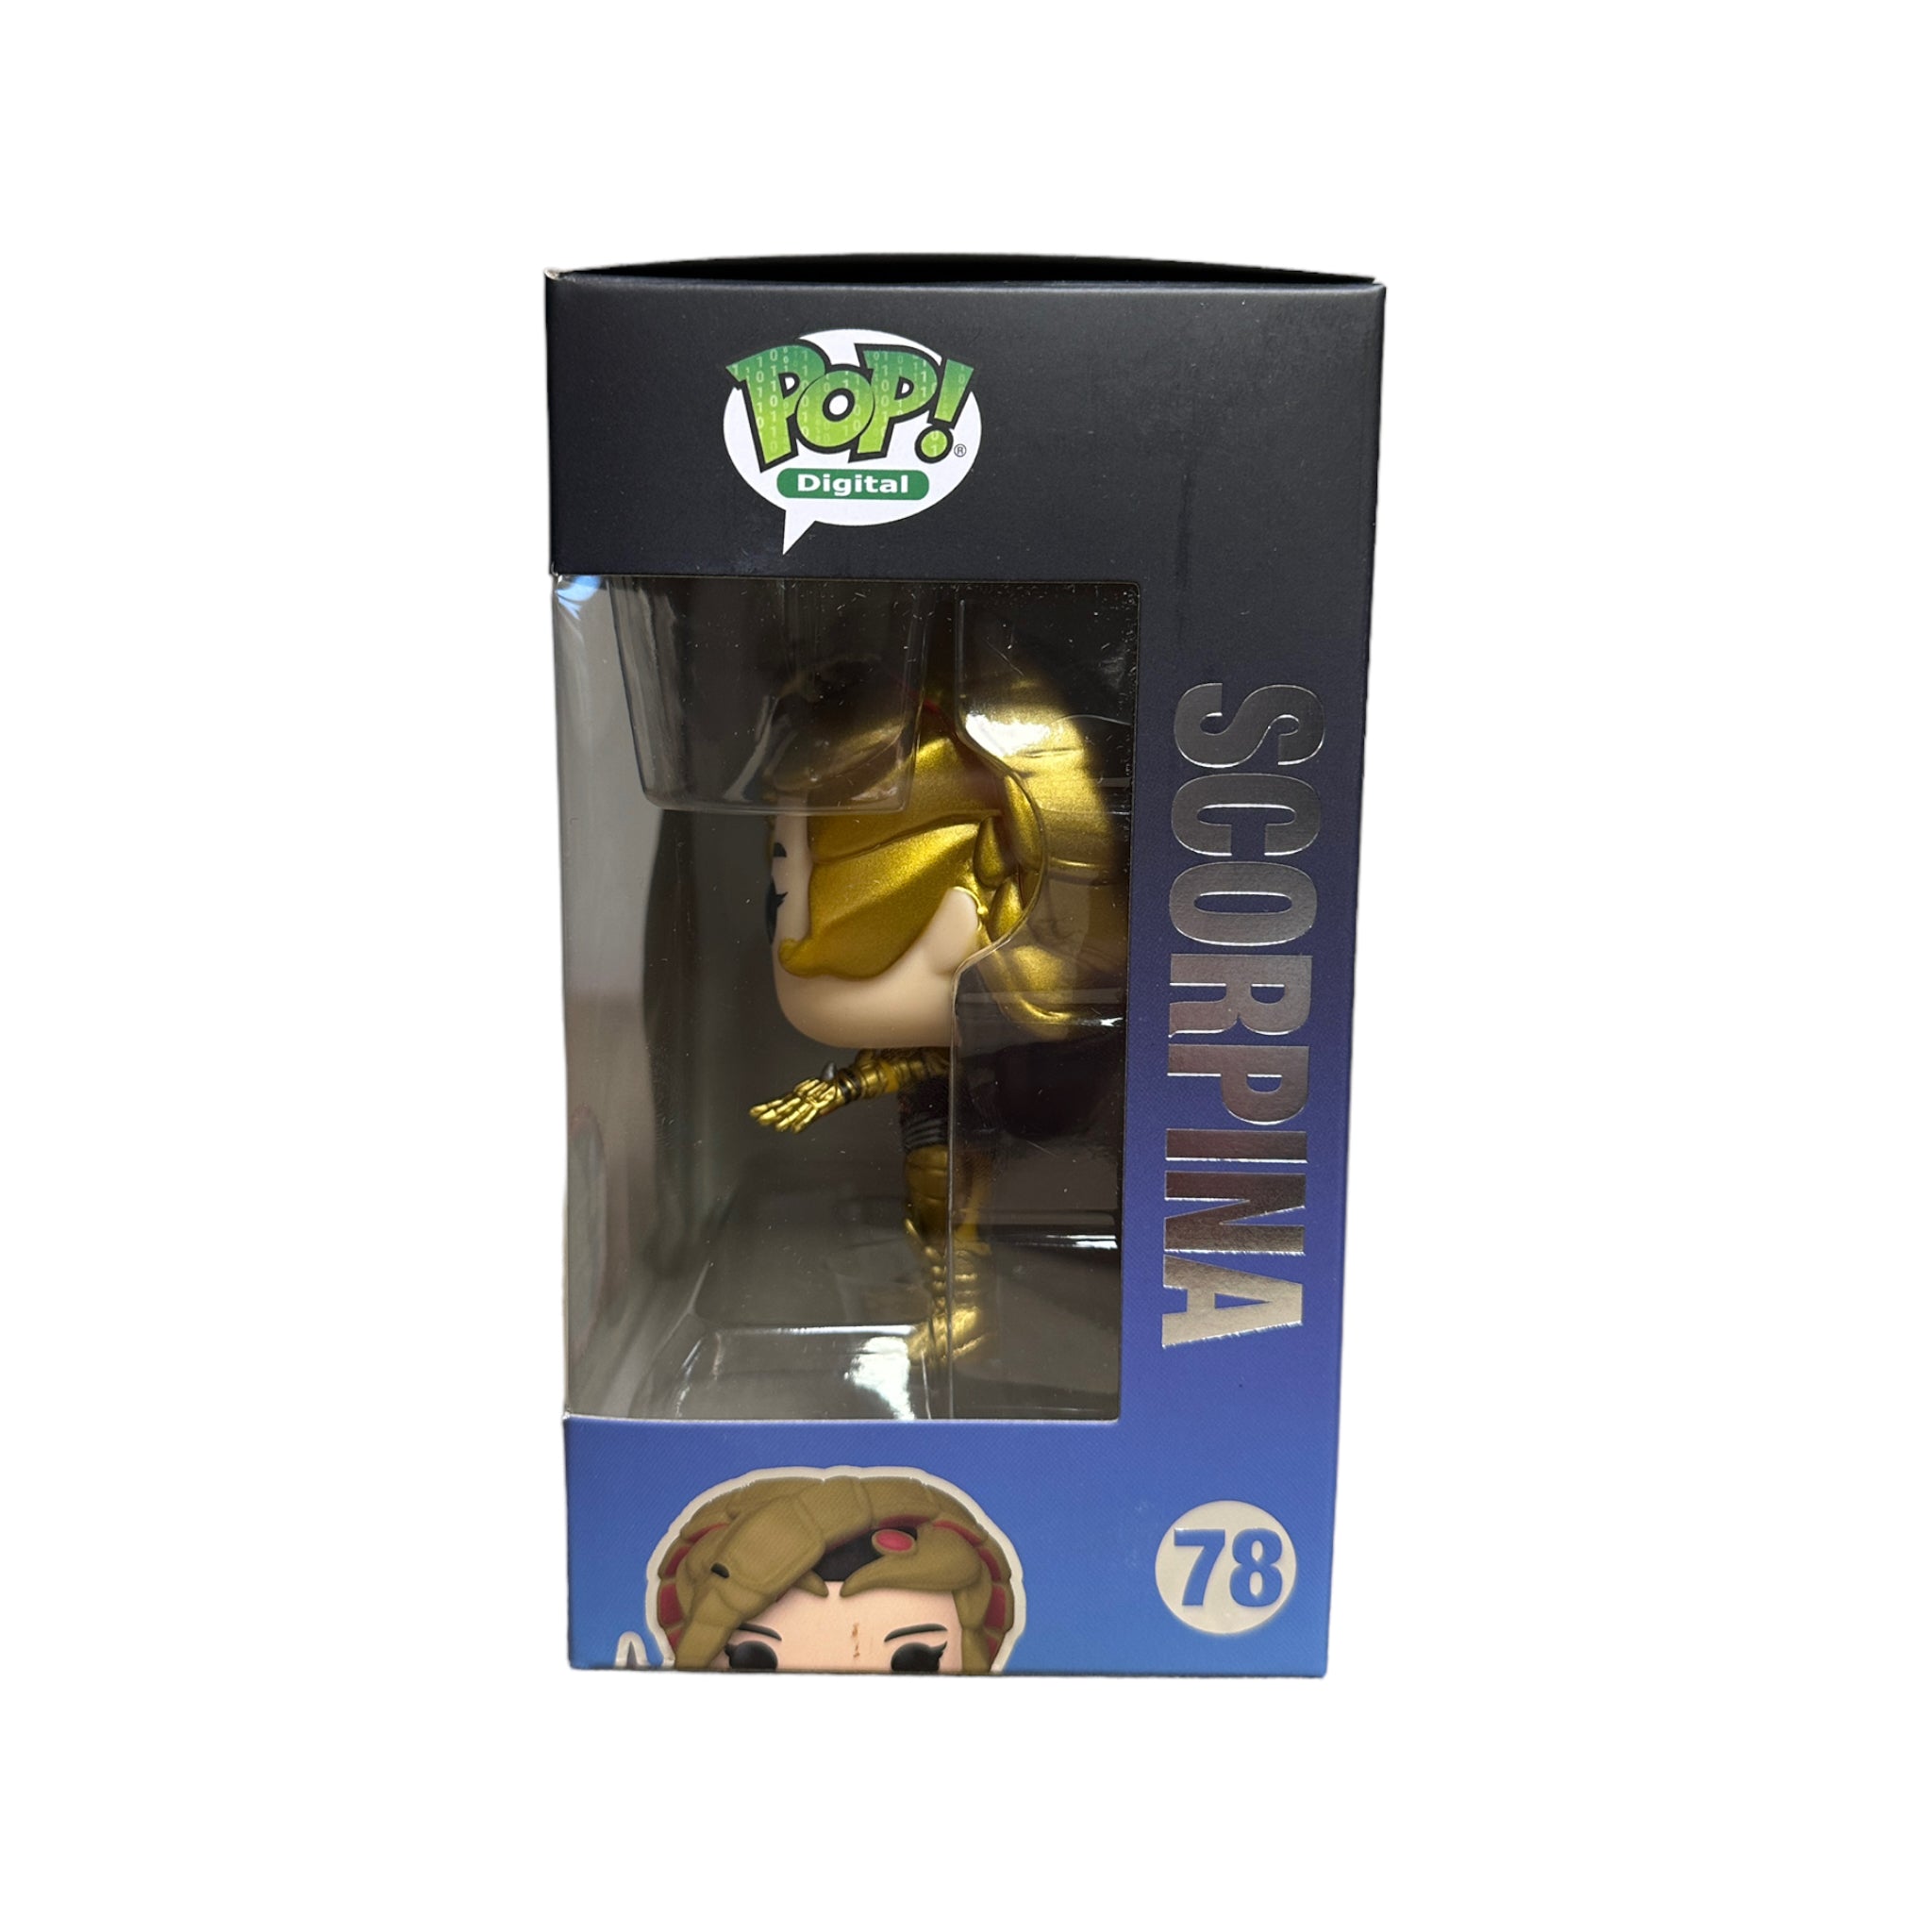 Scorpina #78 Funko Pop! - Mighty Morphin Power Rangers - NFT Release Exclusive LE1875 Pcs - Condition 9/10